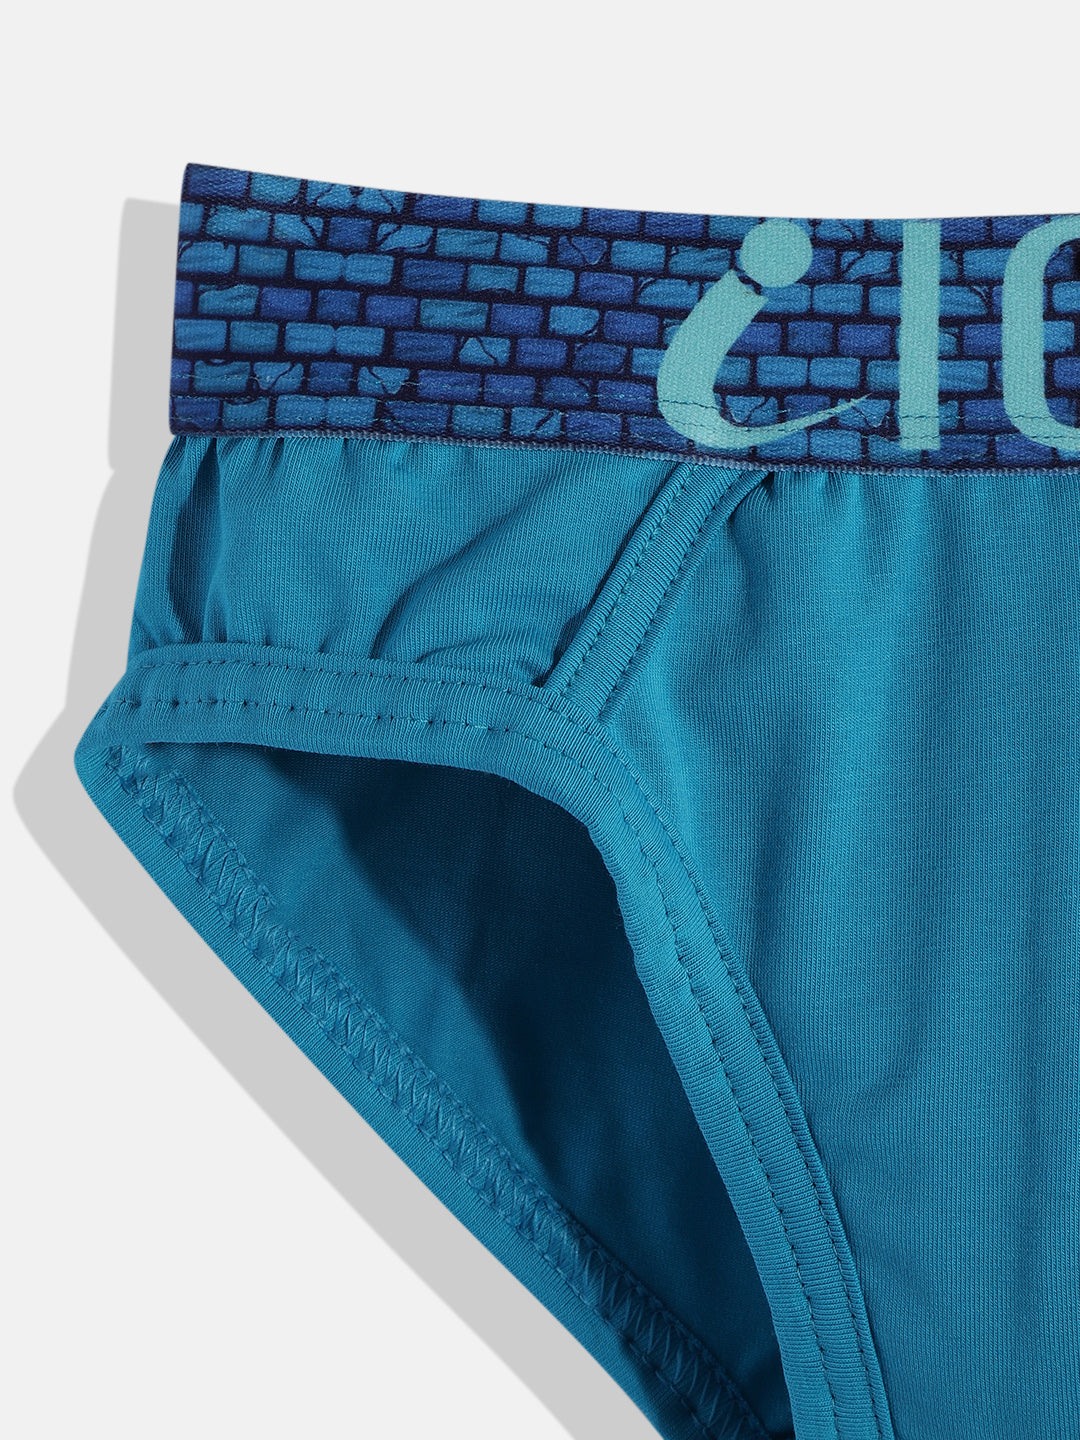 IC4 Boys Fashion Brief Combo Pack of 2 Teal